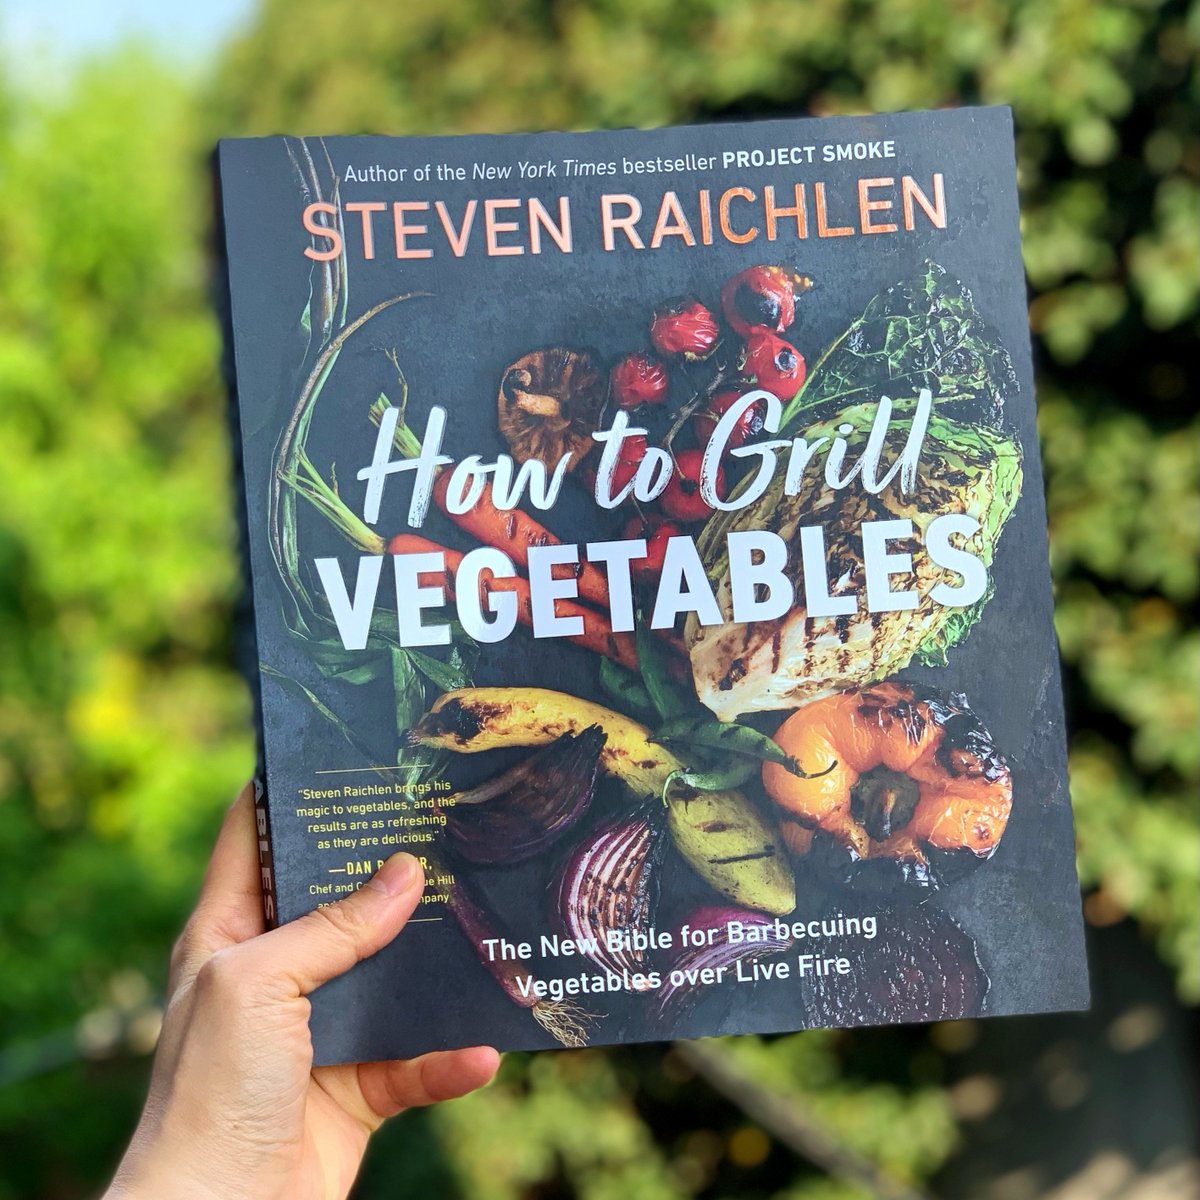 How to Grill Vegetables has been nominated for a 2022 @IACPculinary award in the category of Best Single Subject. Congratulations, @sraichlen! A celebration of all the ways to grill green, this cookbook shows how to bring live fire or wood smoke to every imaginable vegetable.